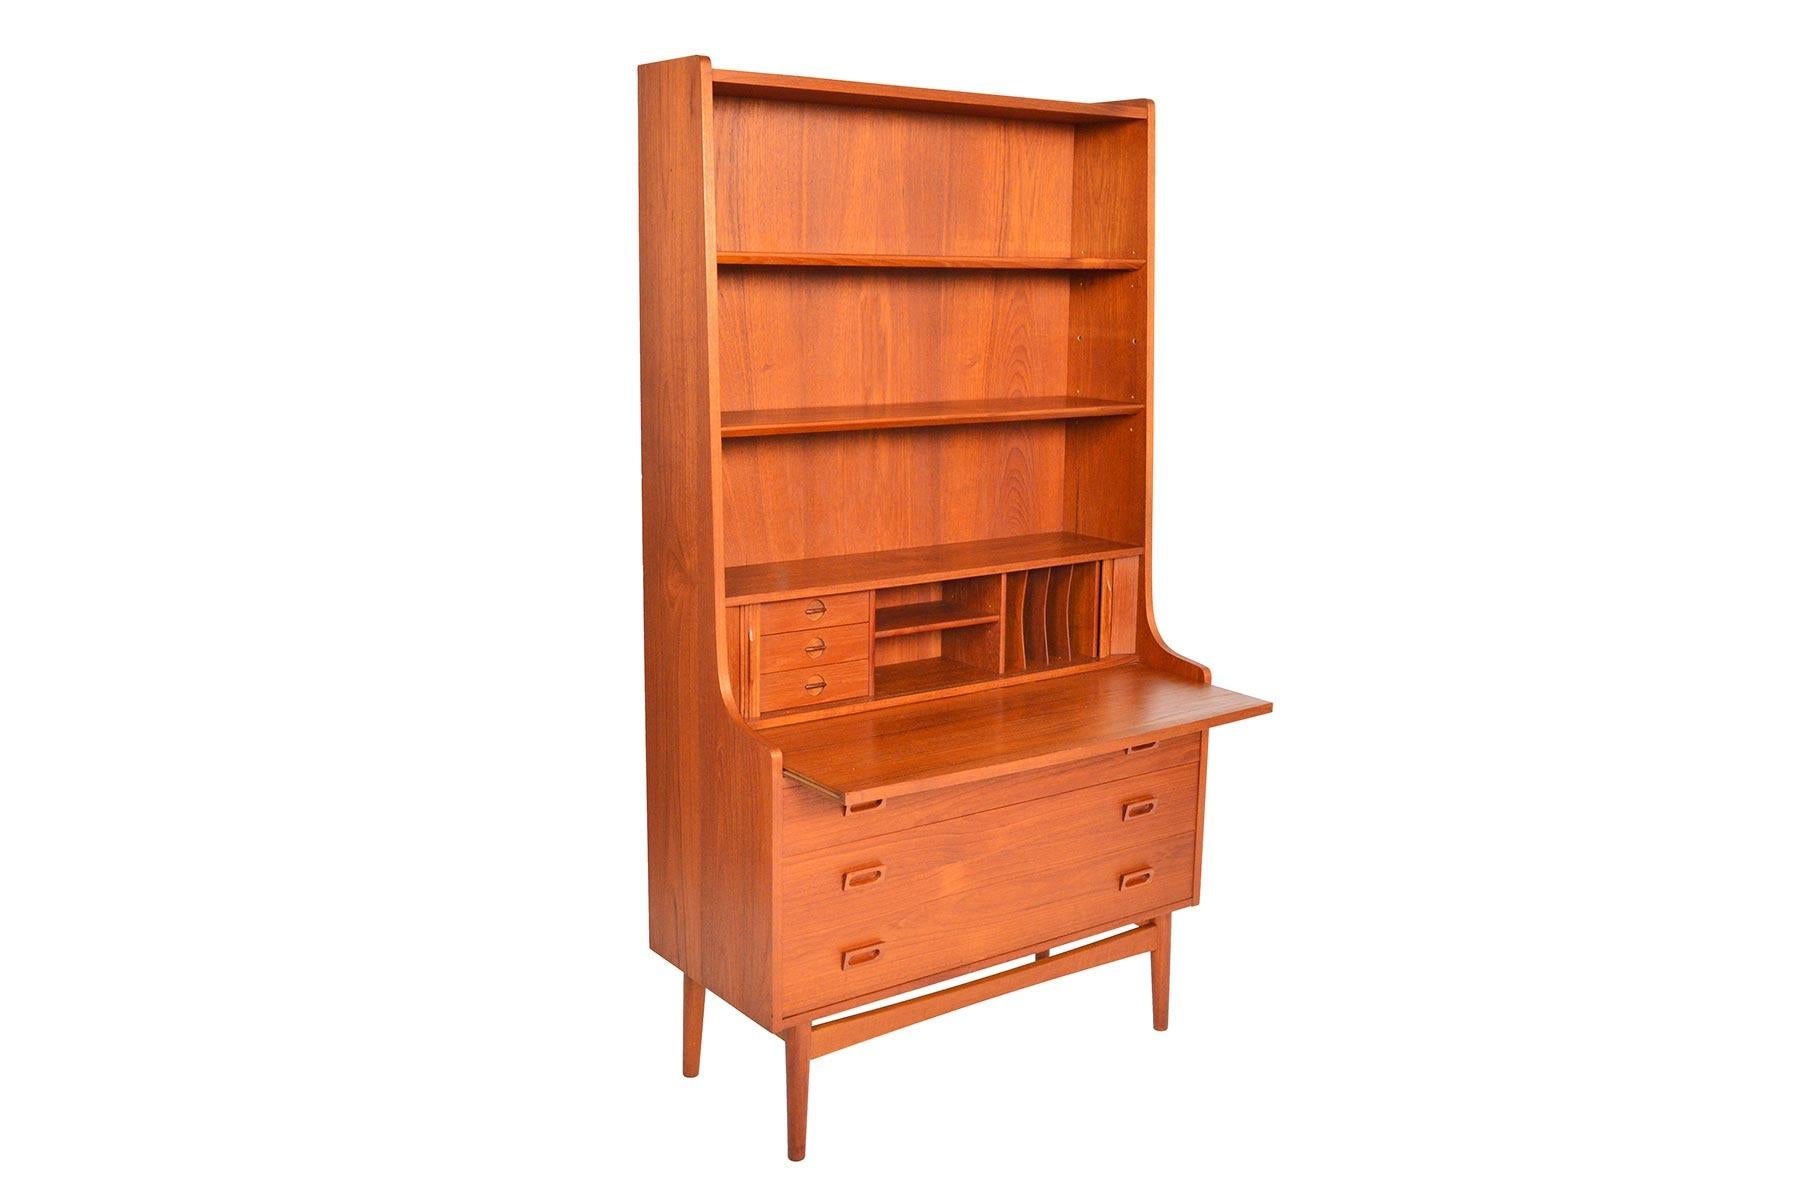 This beautiful Danish modern midcentury bookcase in teak was designed by Johannes Sorth for Bornholm Møbelfabrik, Nexø. The tall, upper hutch features three adjustable shelves. The lower cabinet features three large drawers for plenty of storage. A